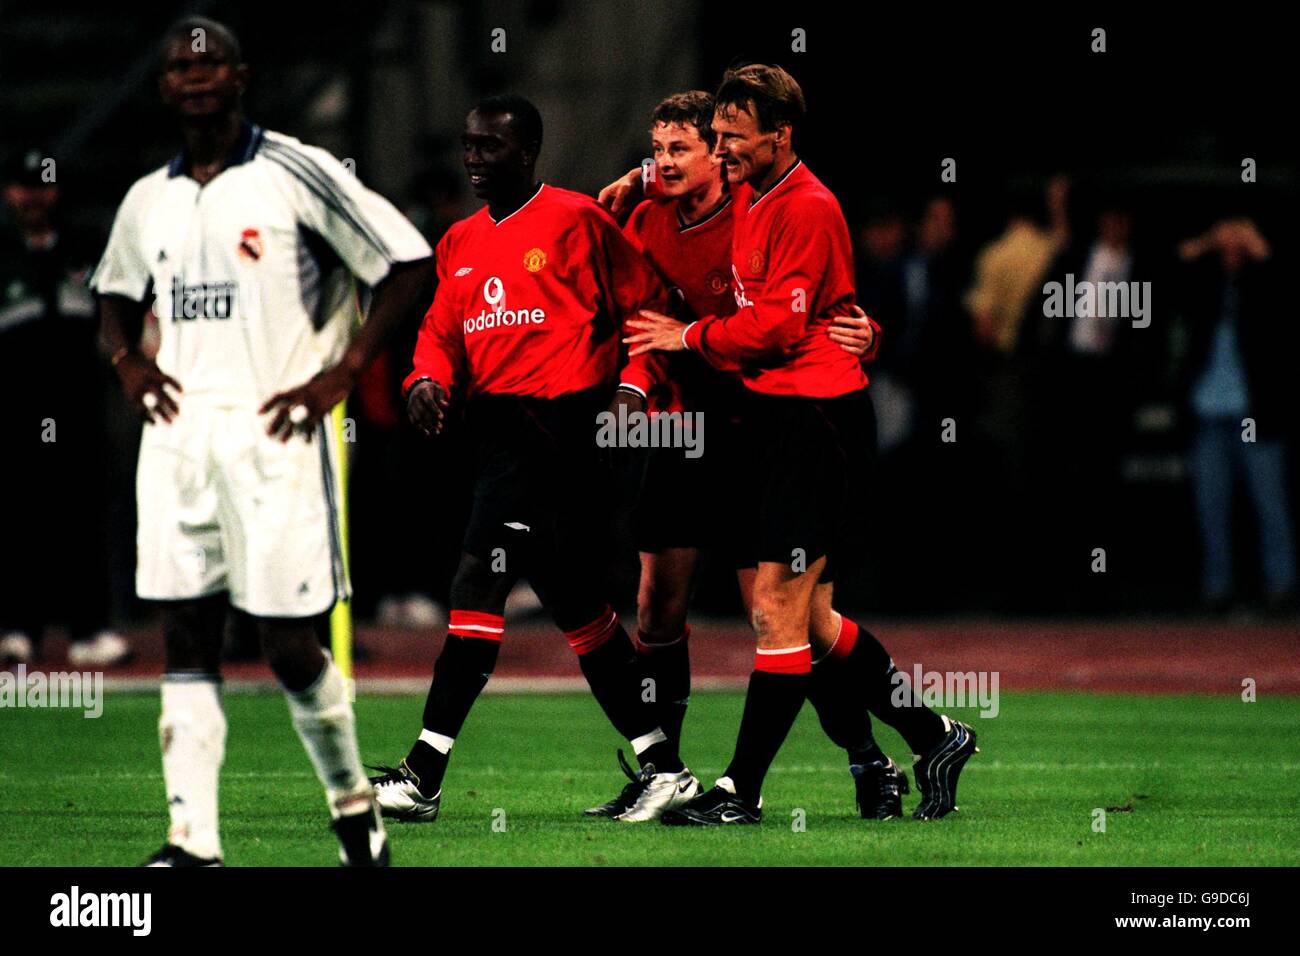 Manchester United's Teddy Sheringham (r) and Dwight Yorke (l) congratulate Ole Gunnar Solskjaer (c) after he scored the winning goal, much to the disgust of Real Madrid's Samuel Eto'o (far left) Stock Photo